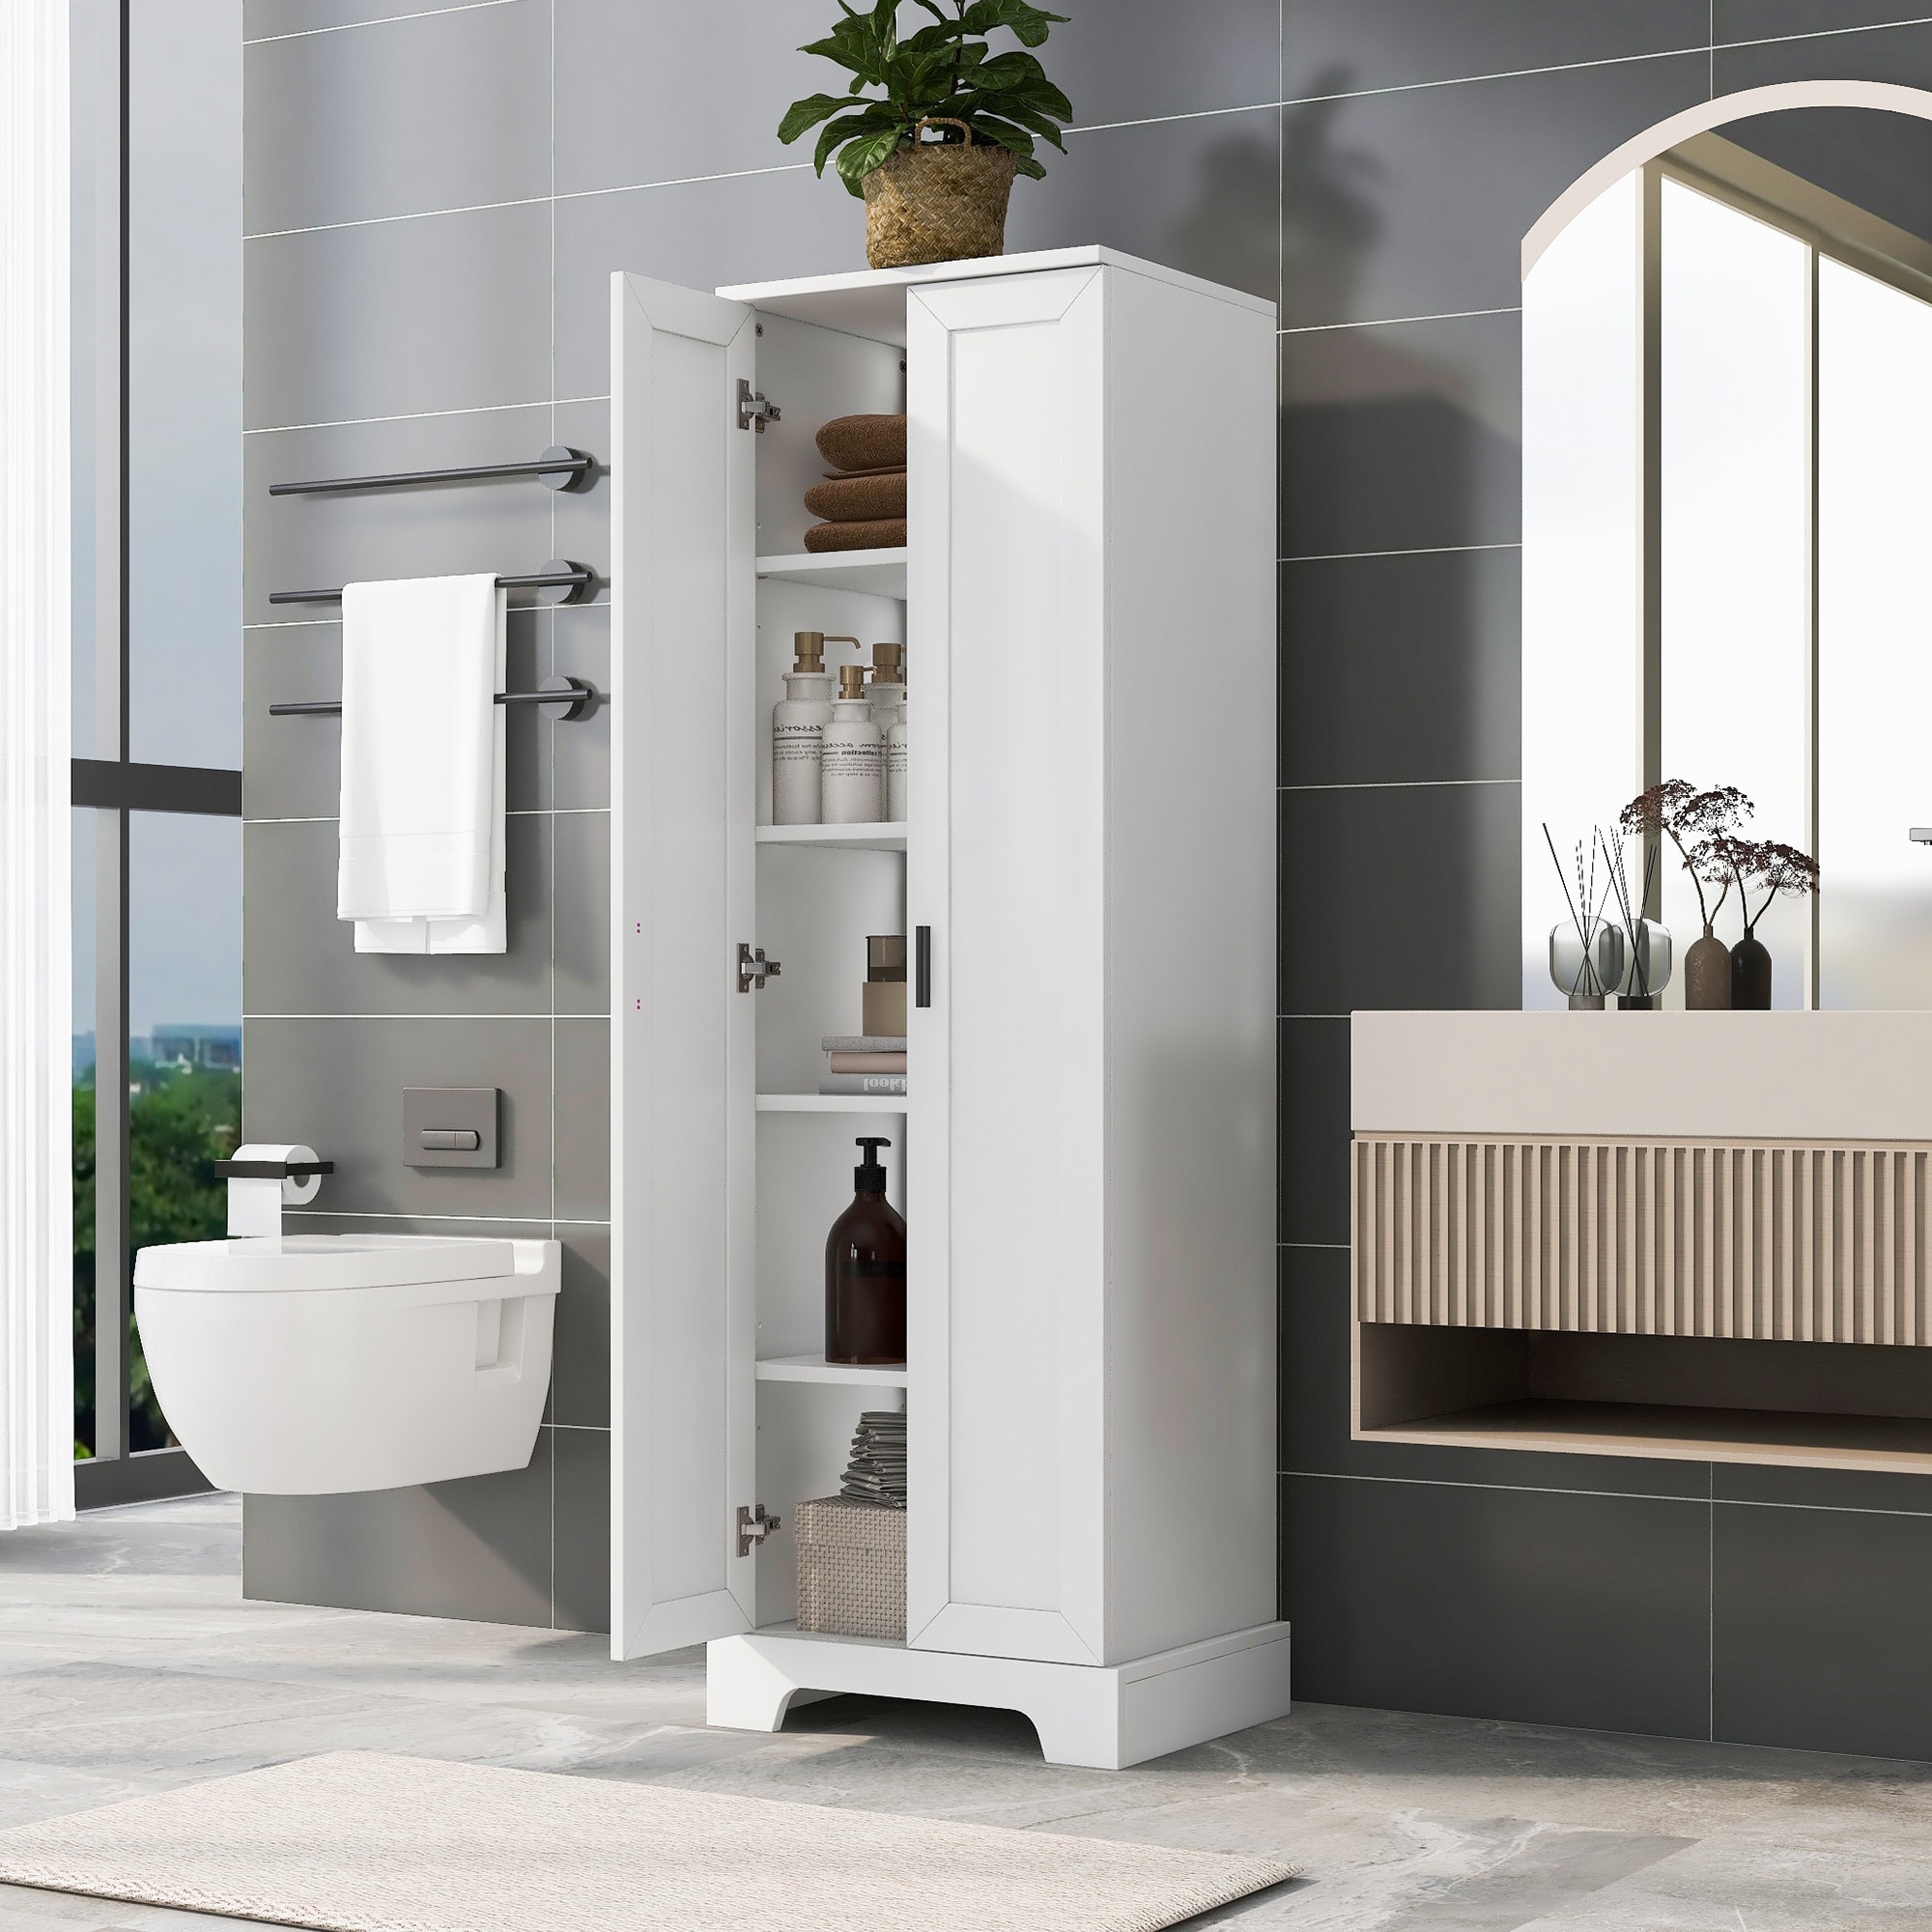 https://ak1.ostkcdn.com/images/products/is/images/direct/e9abccbe255eddc9e8e81894197a24a49f25b708/Tall-Bathroom-Storage-Cabinet%2C-5-Tier-Freestanding-Linen-Tower-Cabinet-with-2-Doors%2C-Storage-Organizer-Narrow-Slim-Floor-Cabinet.jpg